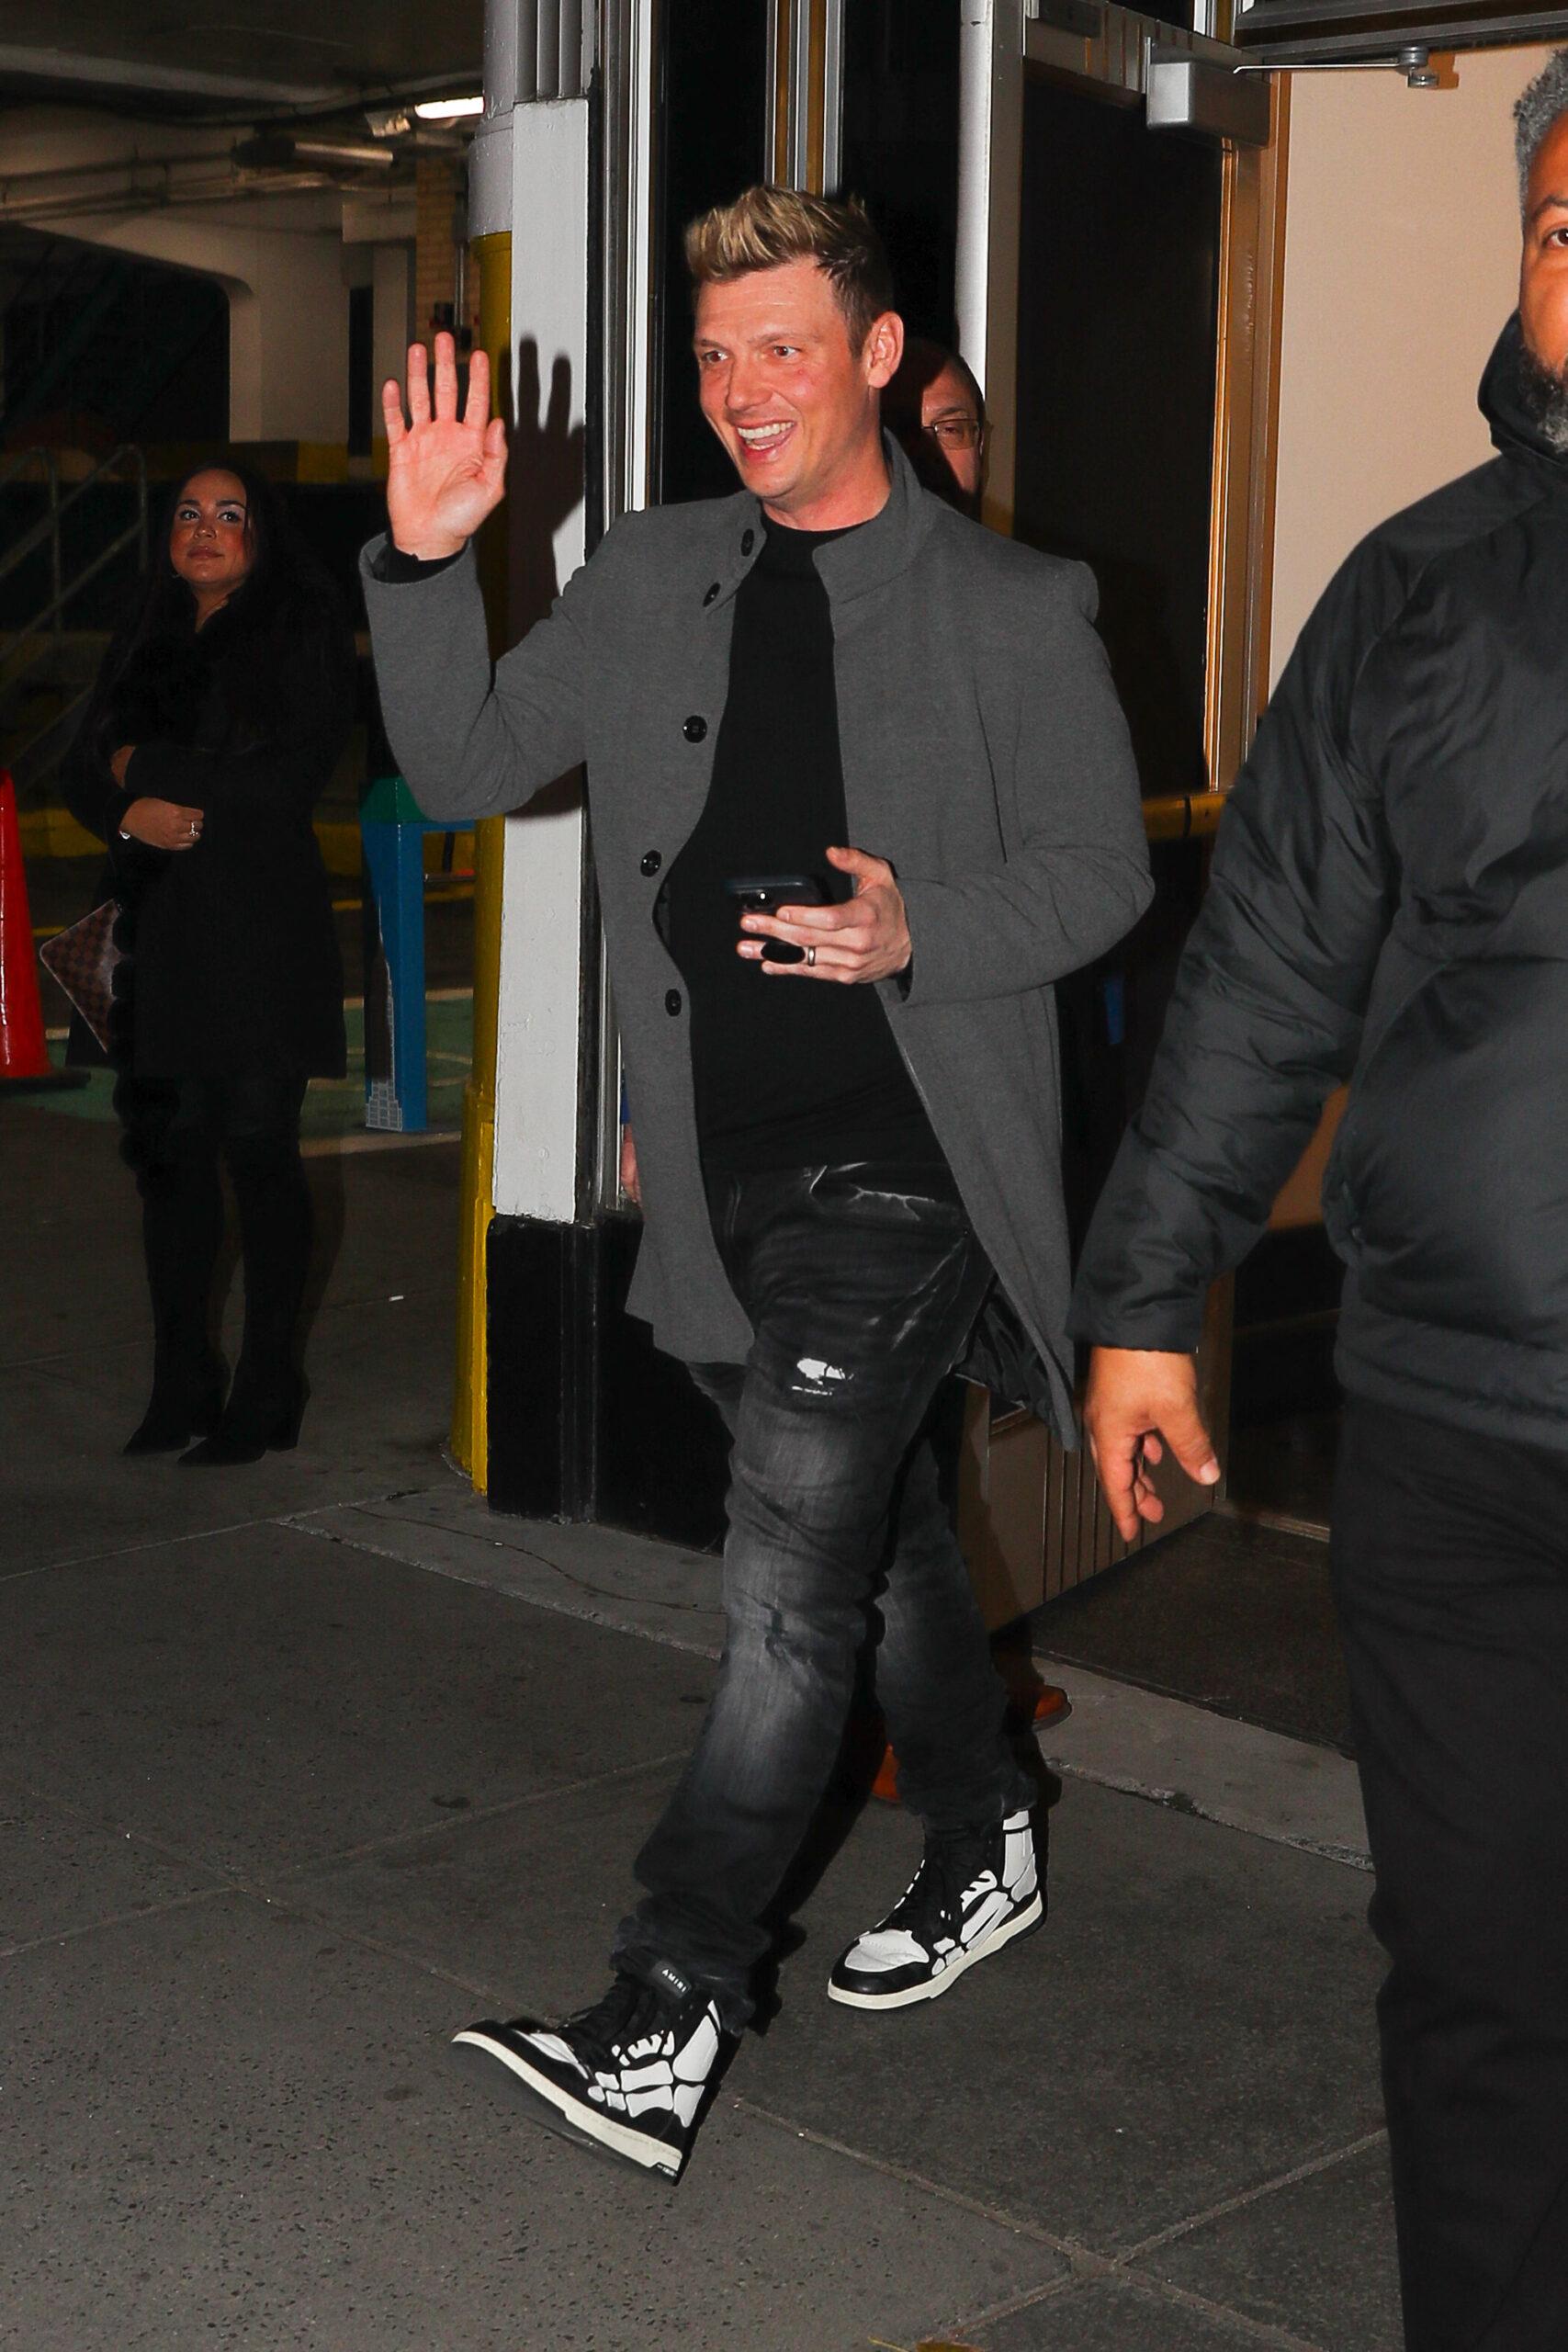 Nick Carter is all smiling on the day he was sued for Alleged Rape of 17-Year-Old Girl On Tour Bus Nick waves at his fans outside the Empire State Building in New York City